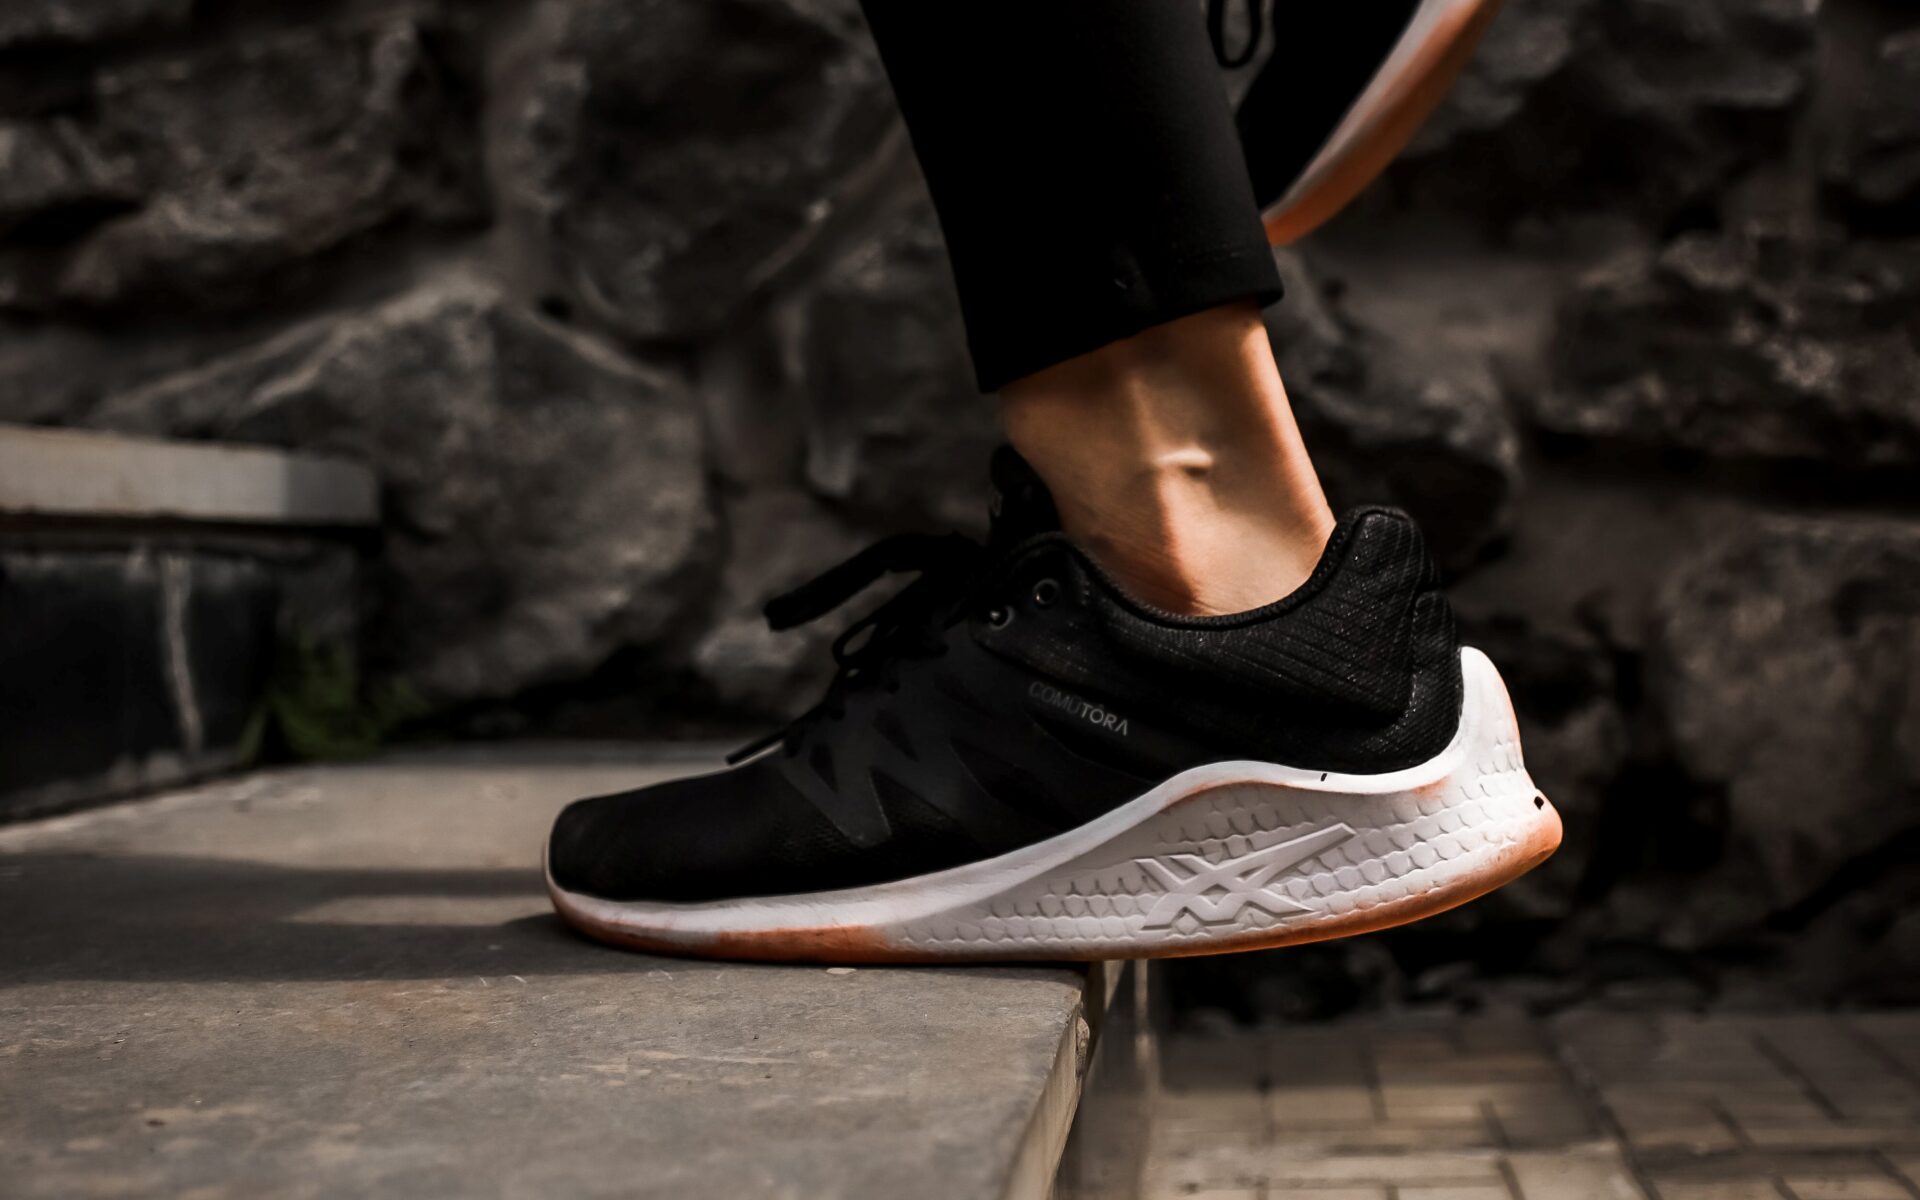 Close-up of a runner's legs and feet as they run up steps (Photo by Maddy Freddie from Pexels)